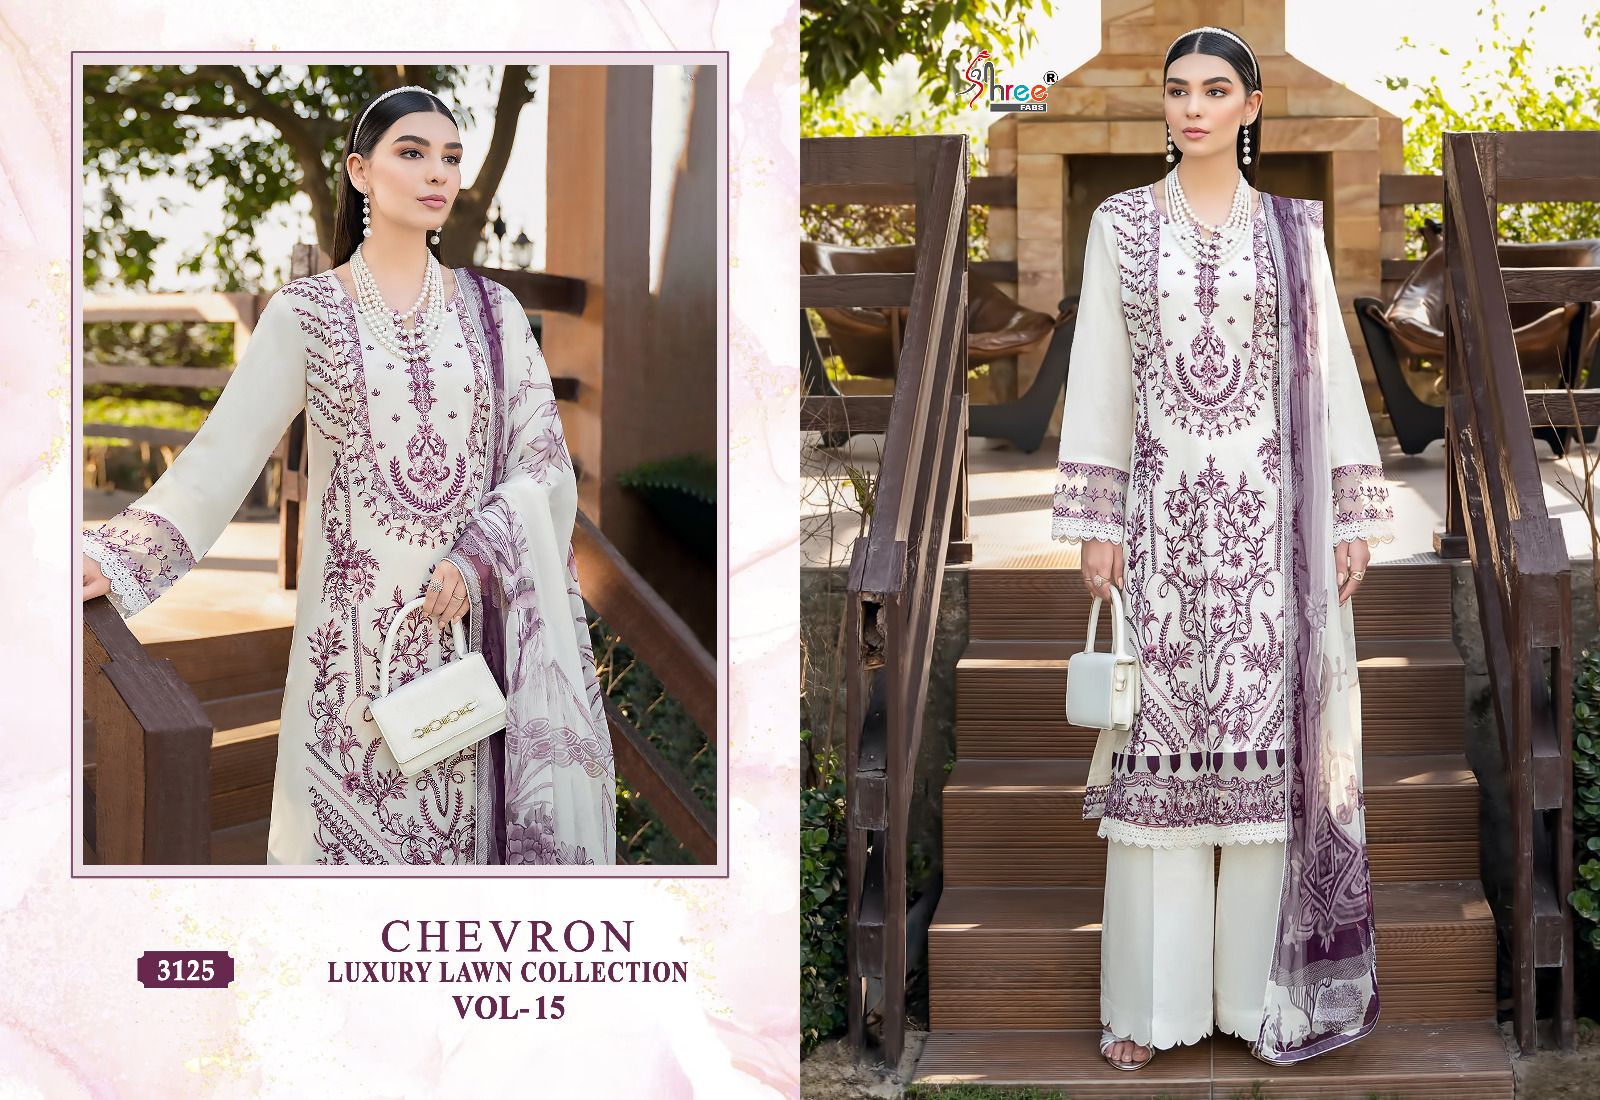 Shree Chevron Luxury Lawn Collection Vol 15 collection 7